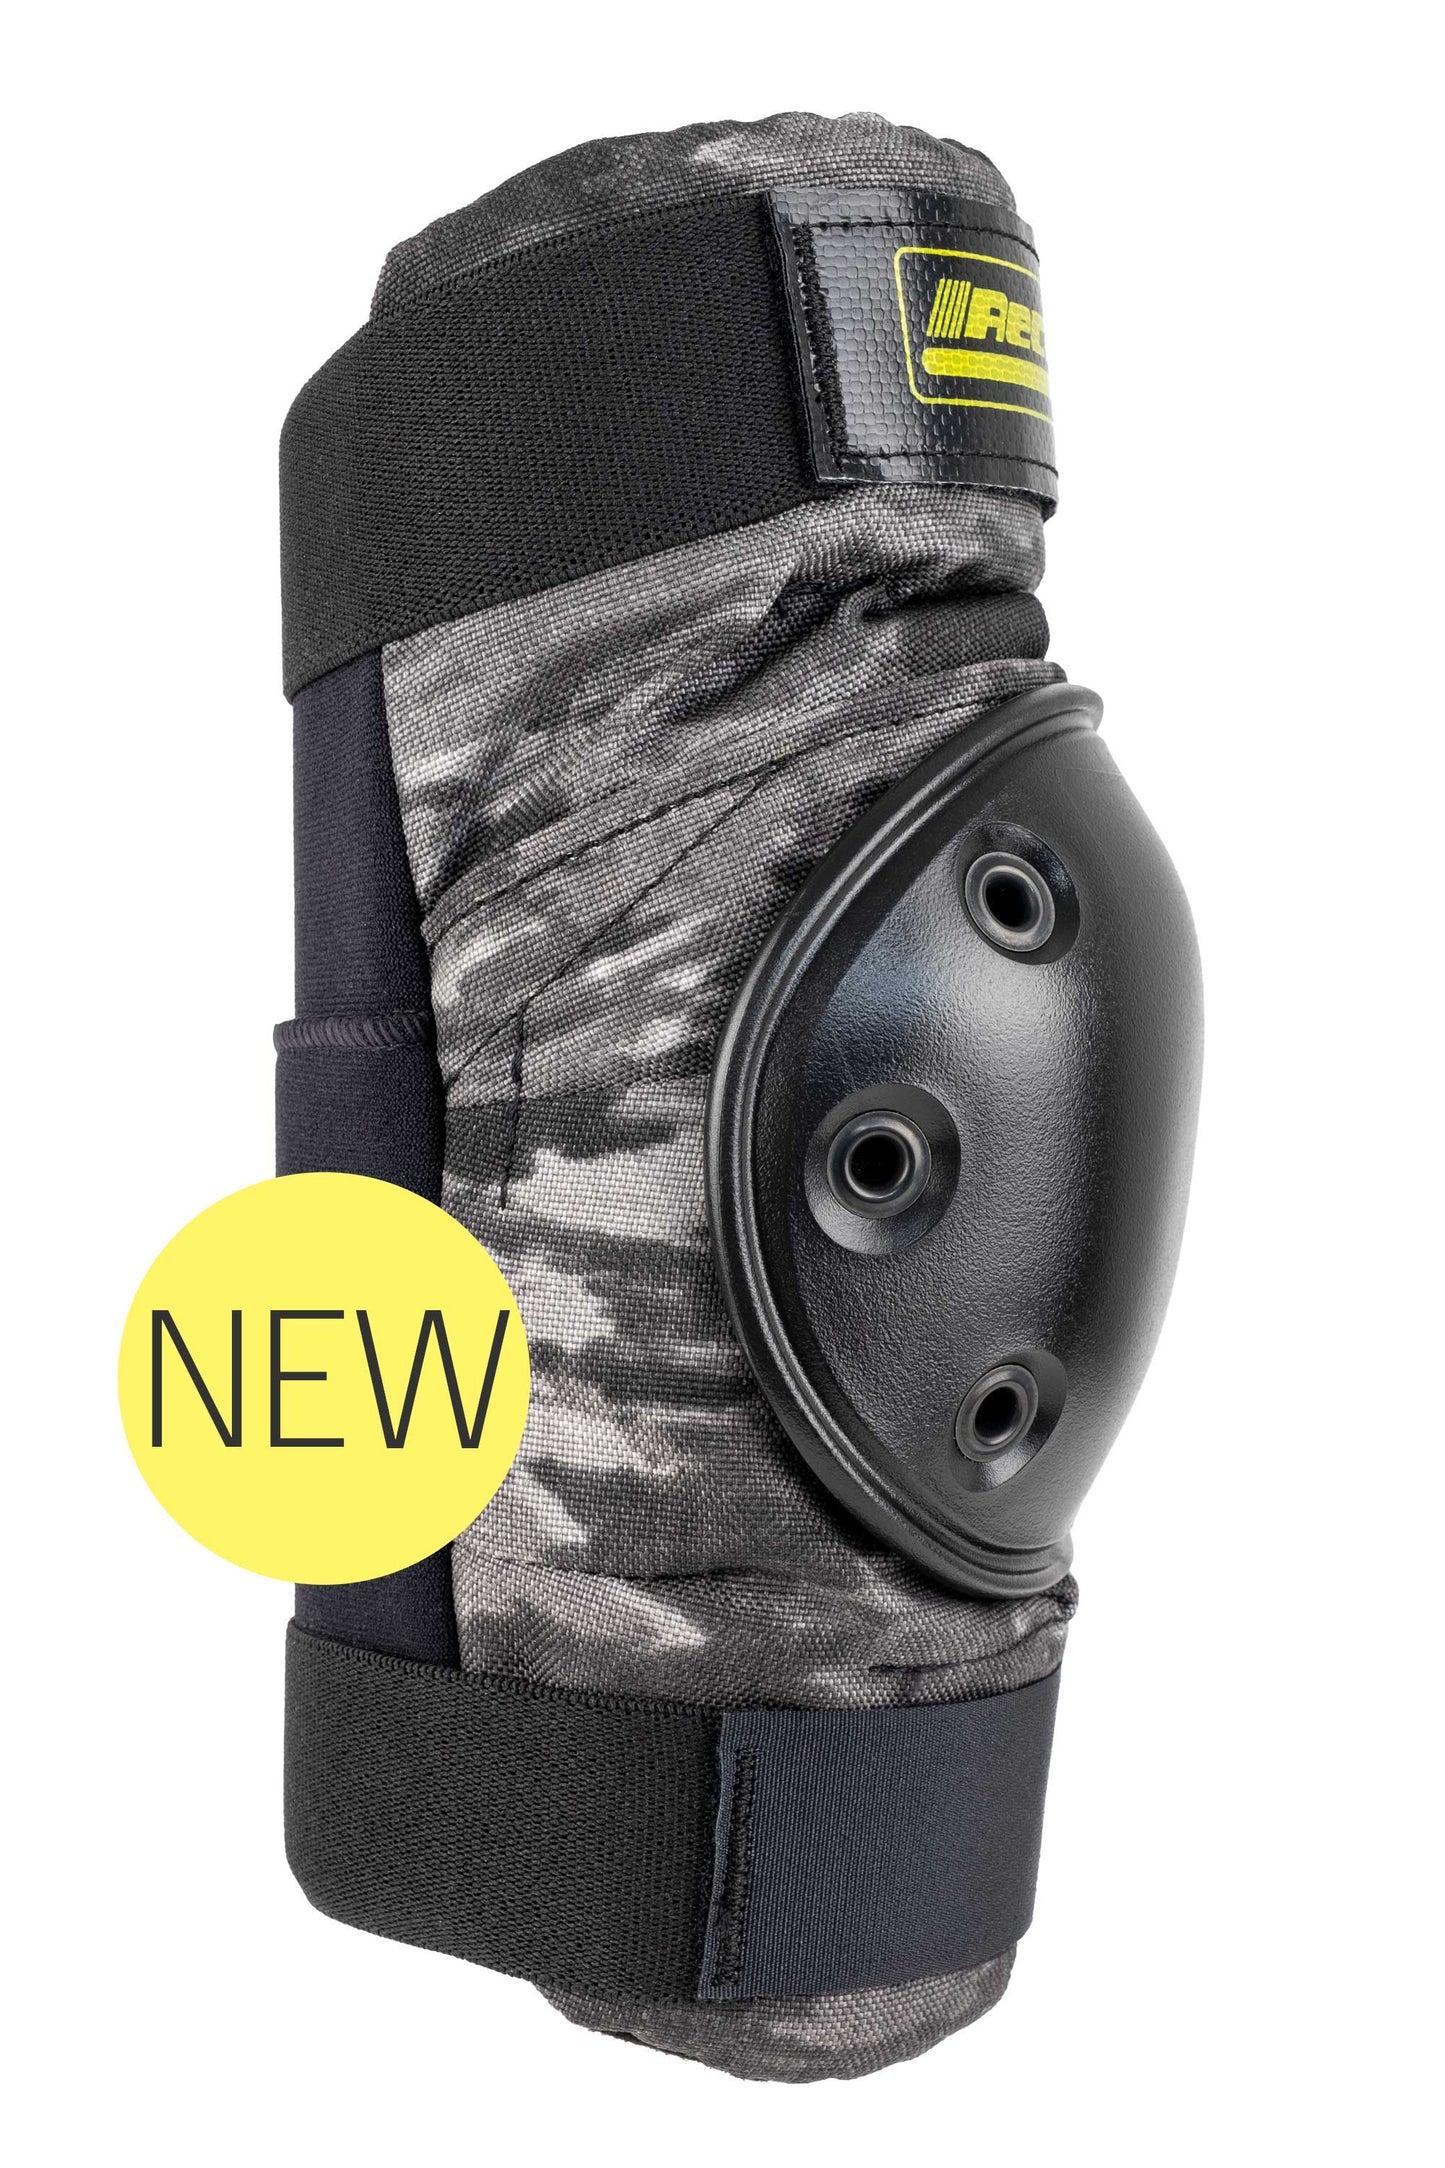 RECTOR® FATBOY™ GHOST Elbow Pads